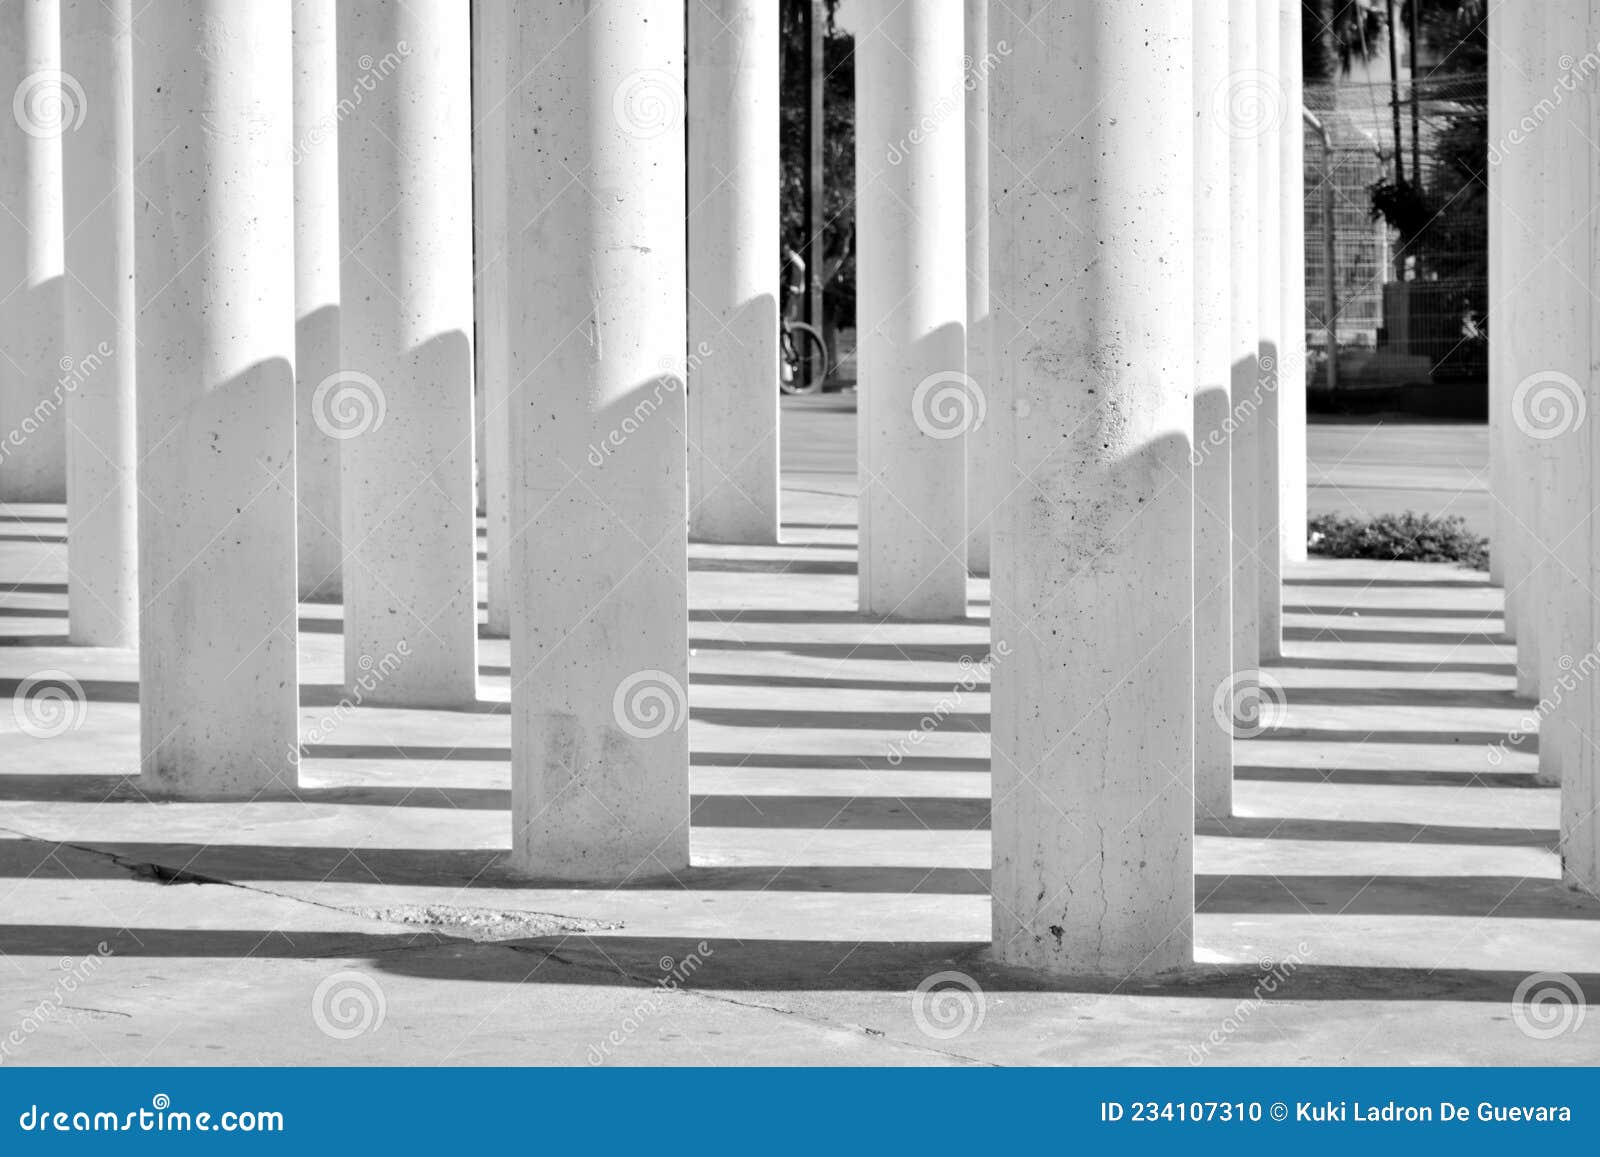 columns and their shadows, black and white